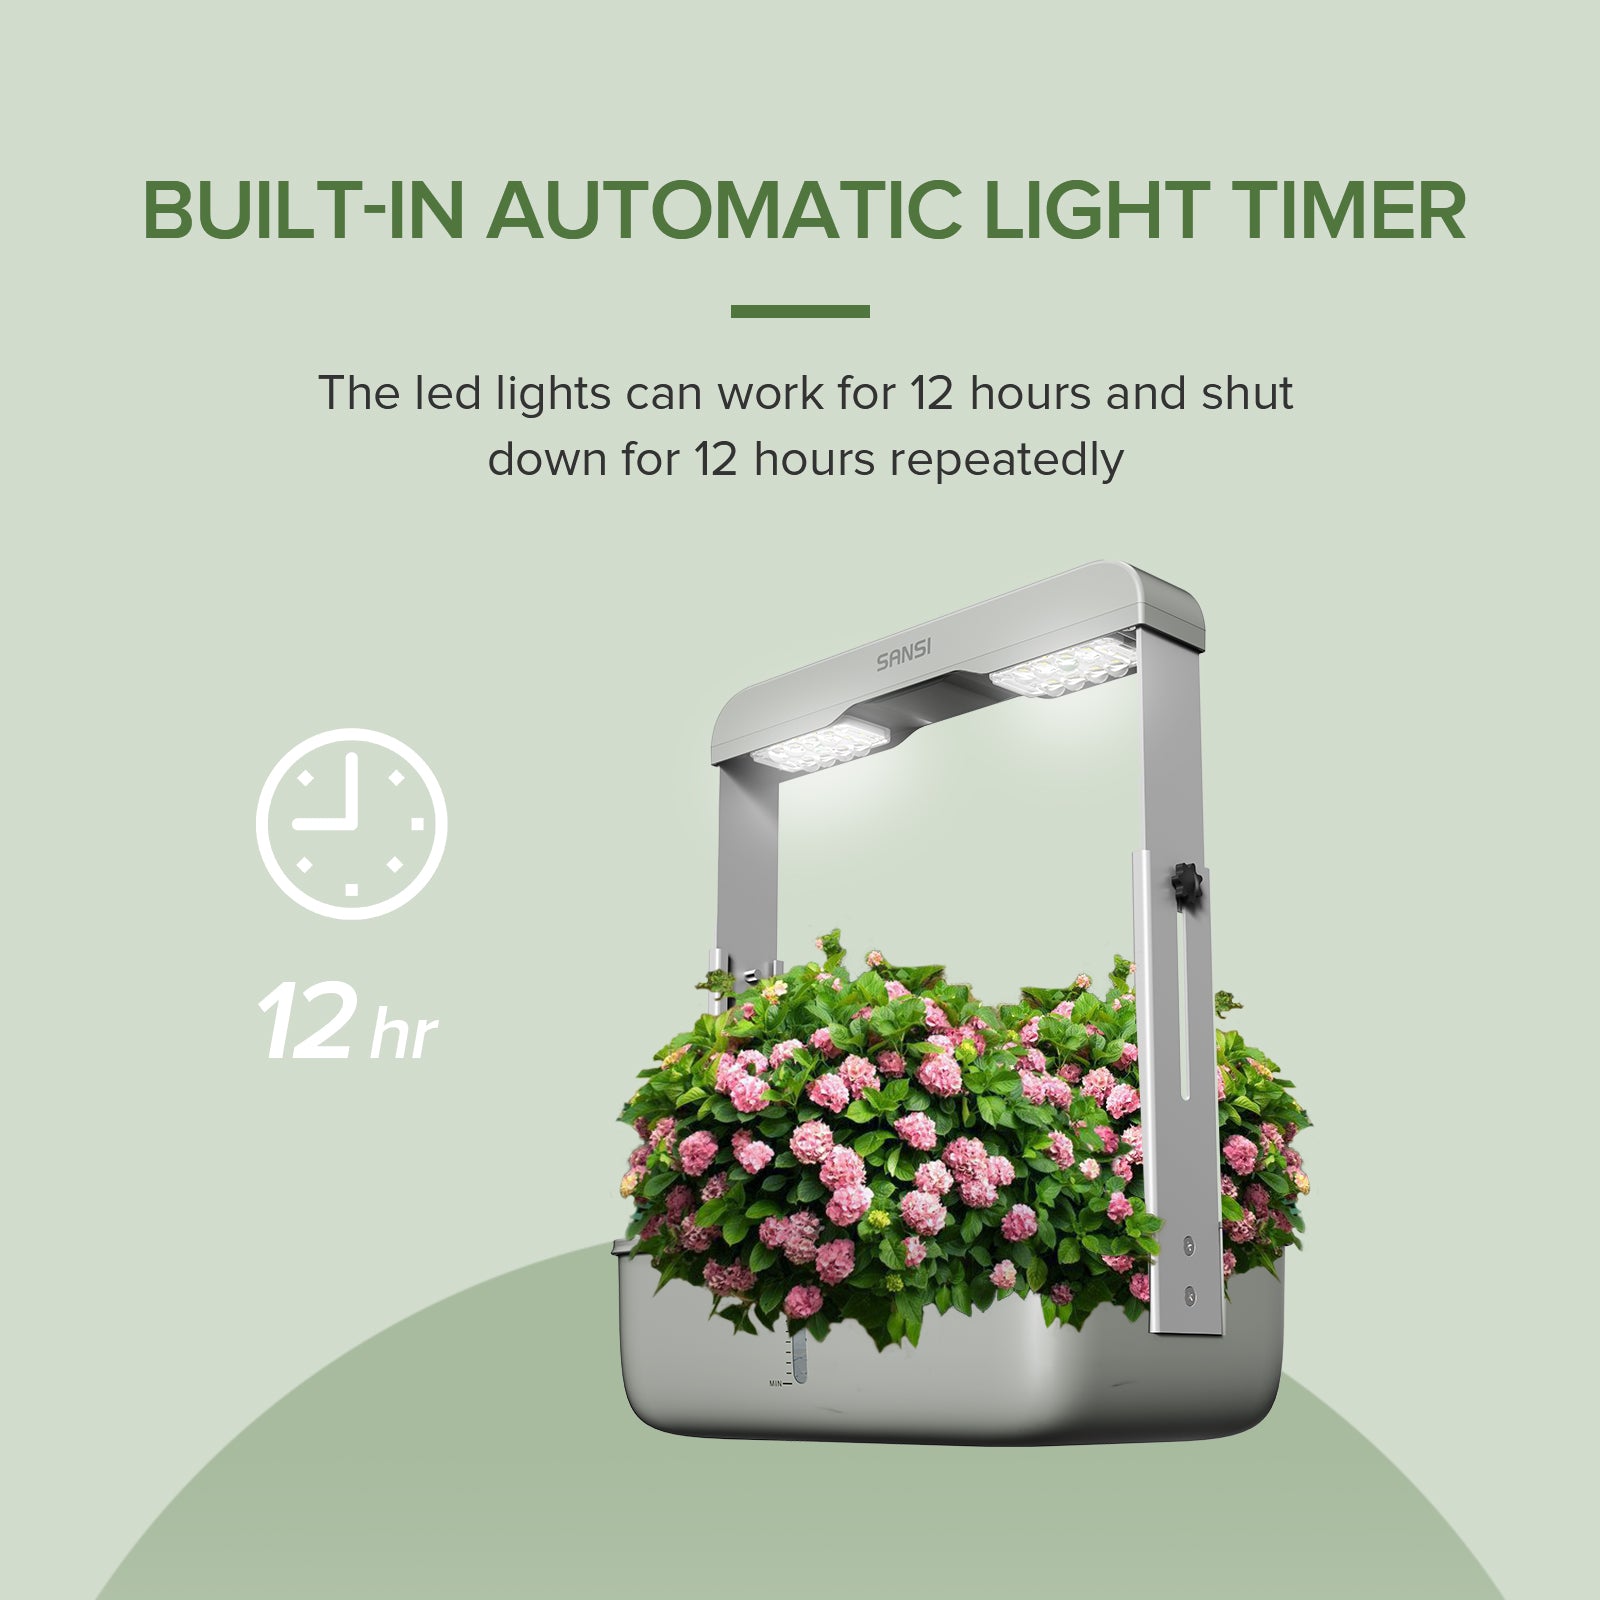 Hydroponics Growing System (US ONLY) has automatic light timer，which can work for 12 hours and shutdown for 12 hours repeatedly.